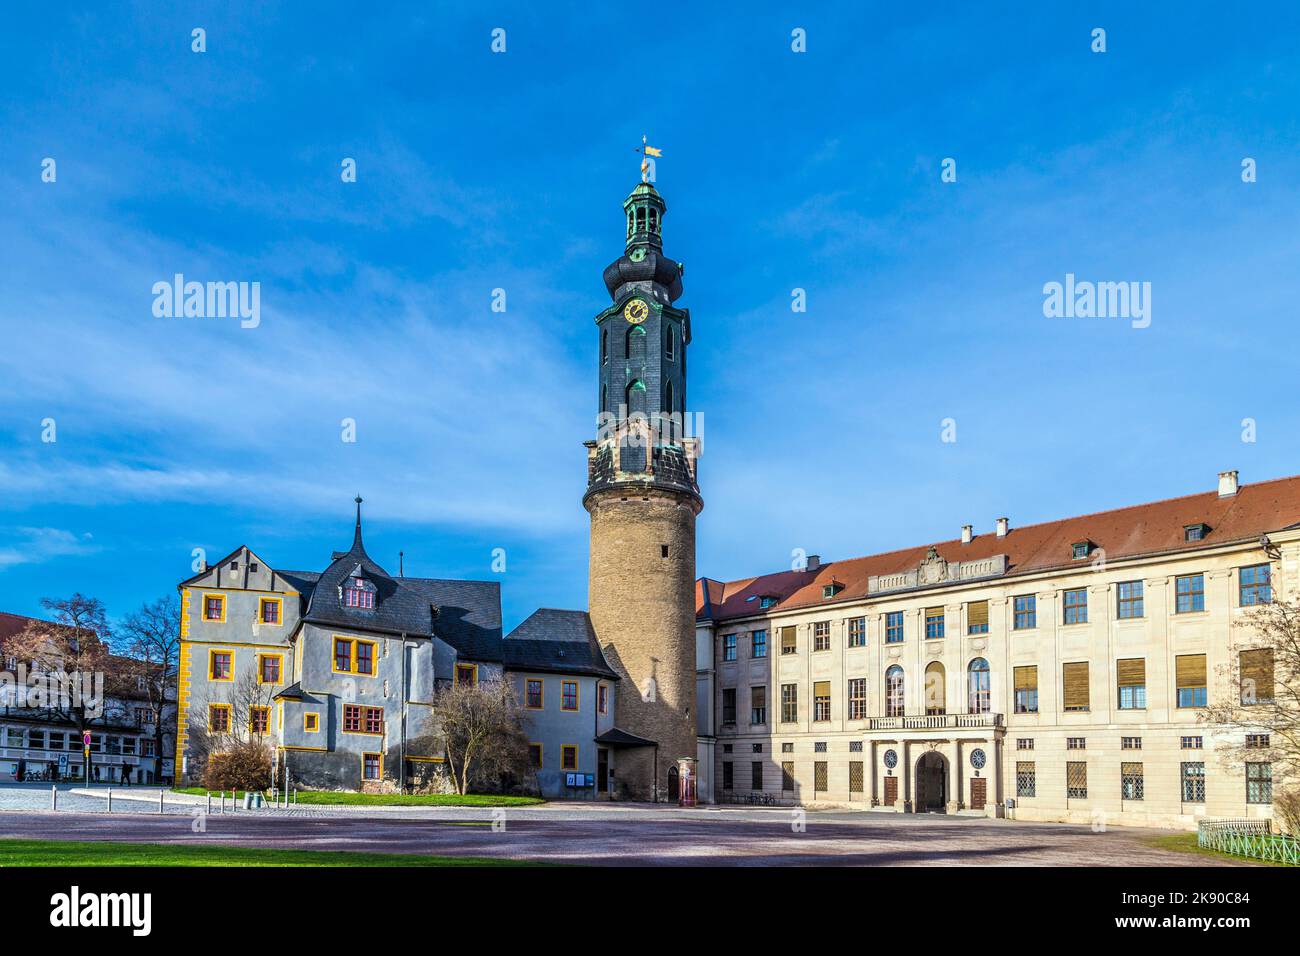 WEIMAR, GERMANY - DEC 19, 2015: city castle Weimar under blue sky. The design of the castle, built as a residence for the Duke of Saxe-Weimar-Eisenach Stock Photo